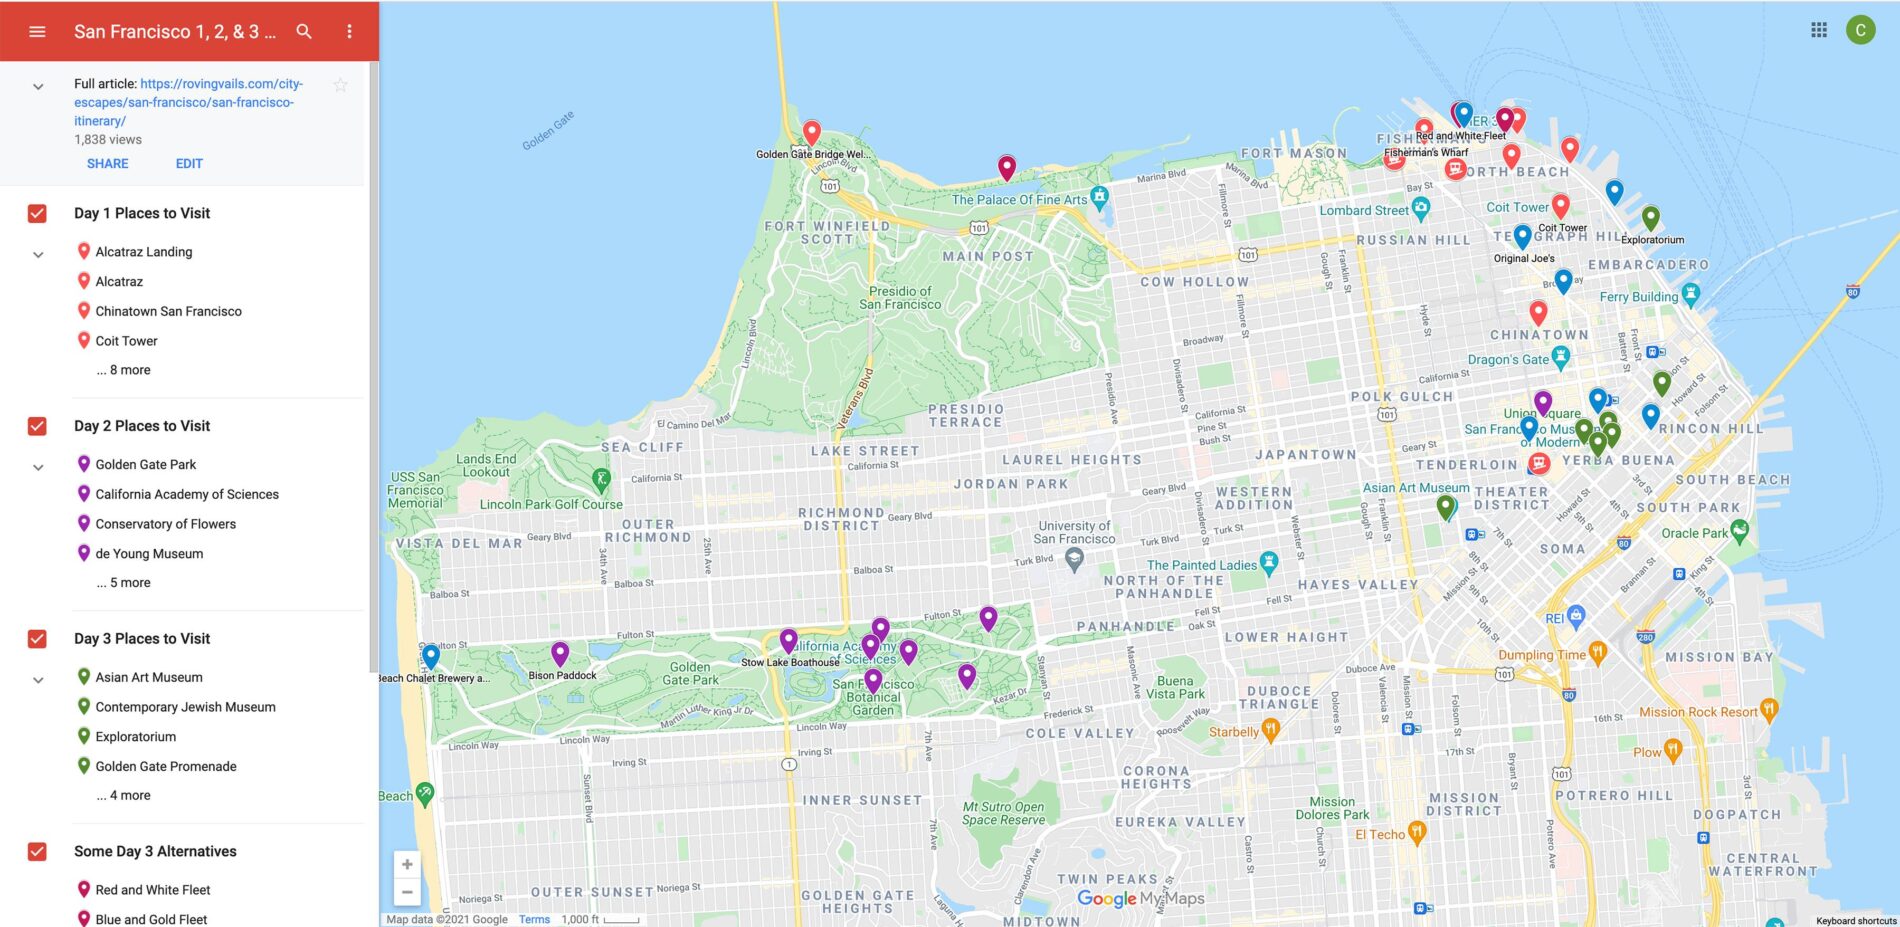 Image of interactive map for San Francisco sightseeing Itineraries.